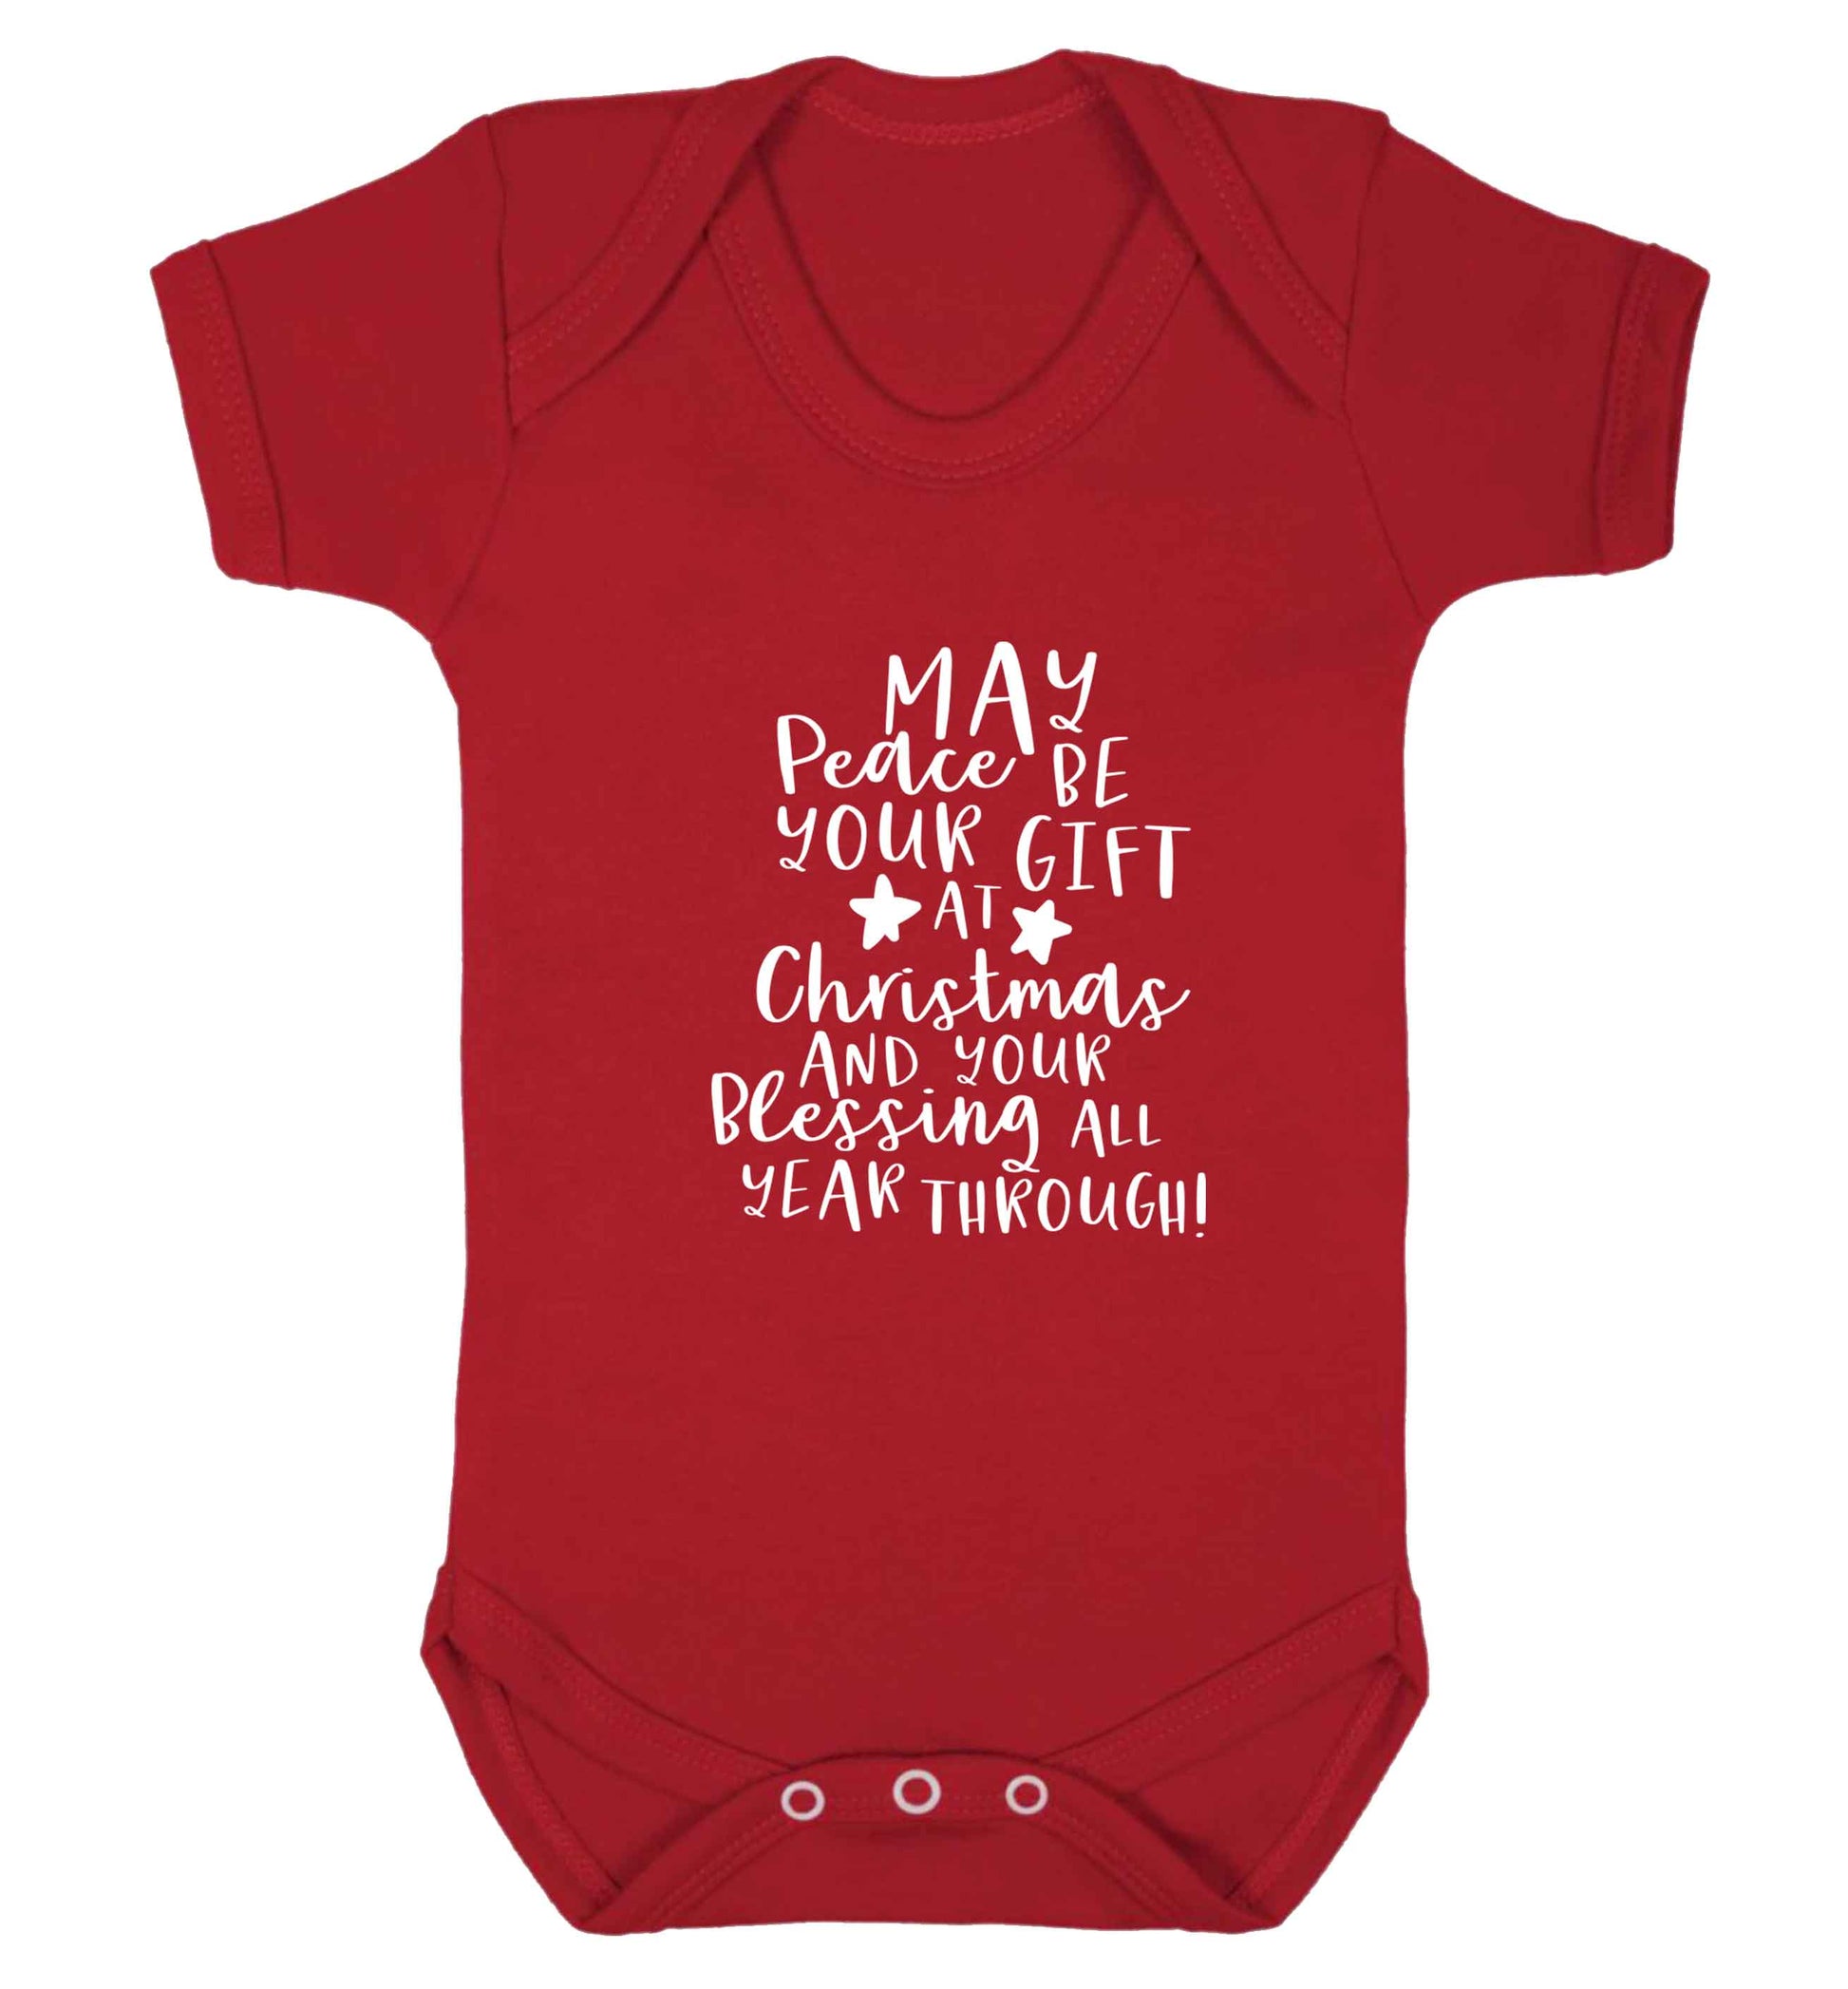 Peace be your Gift at Christmas Gift baby vest red 18-24 months